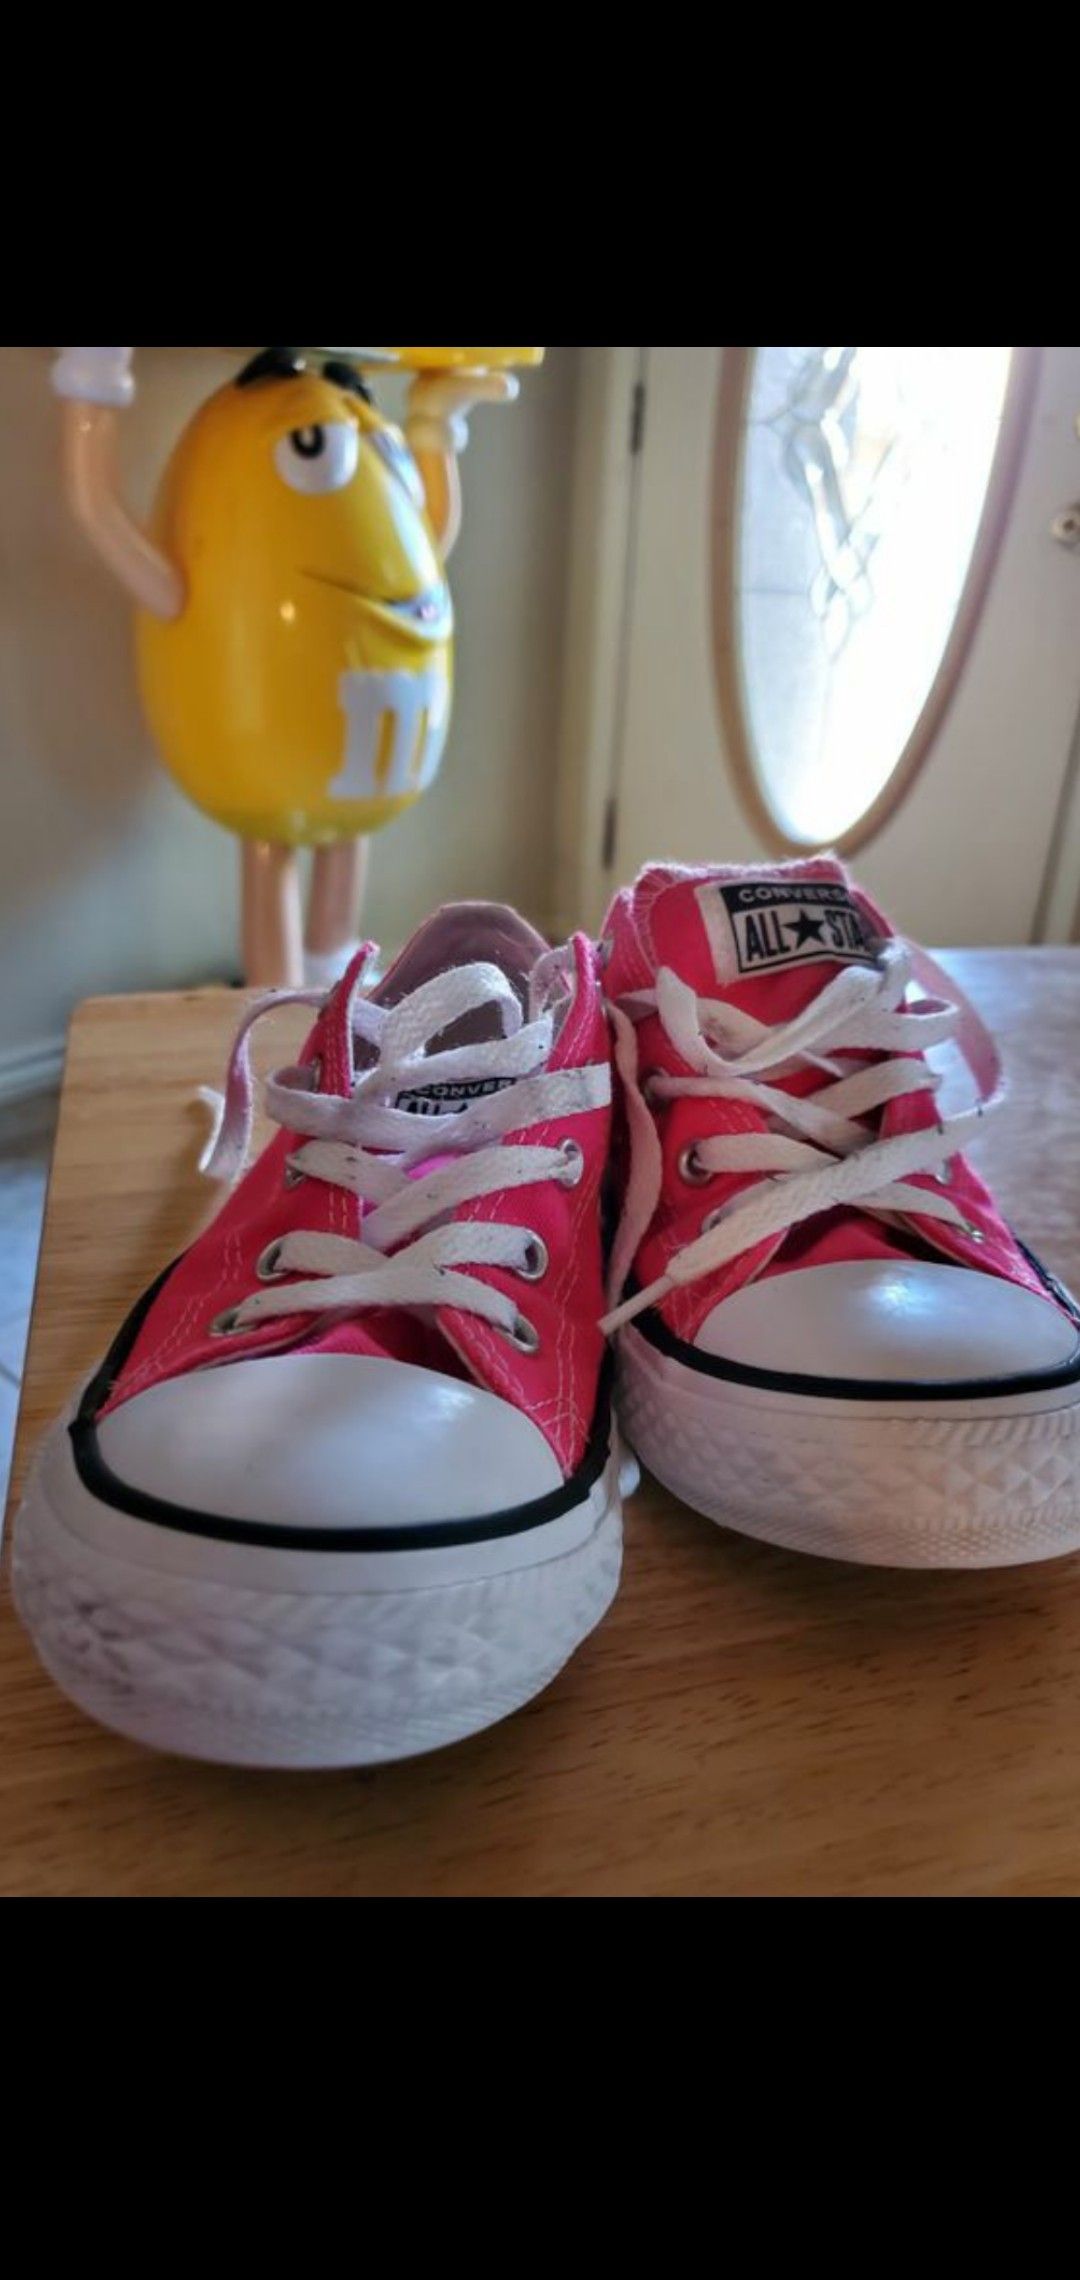 Converse bubble gum pink size girls 1.5 worn once